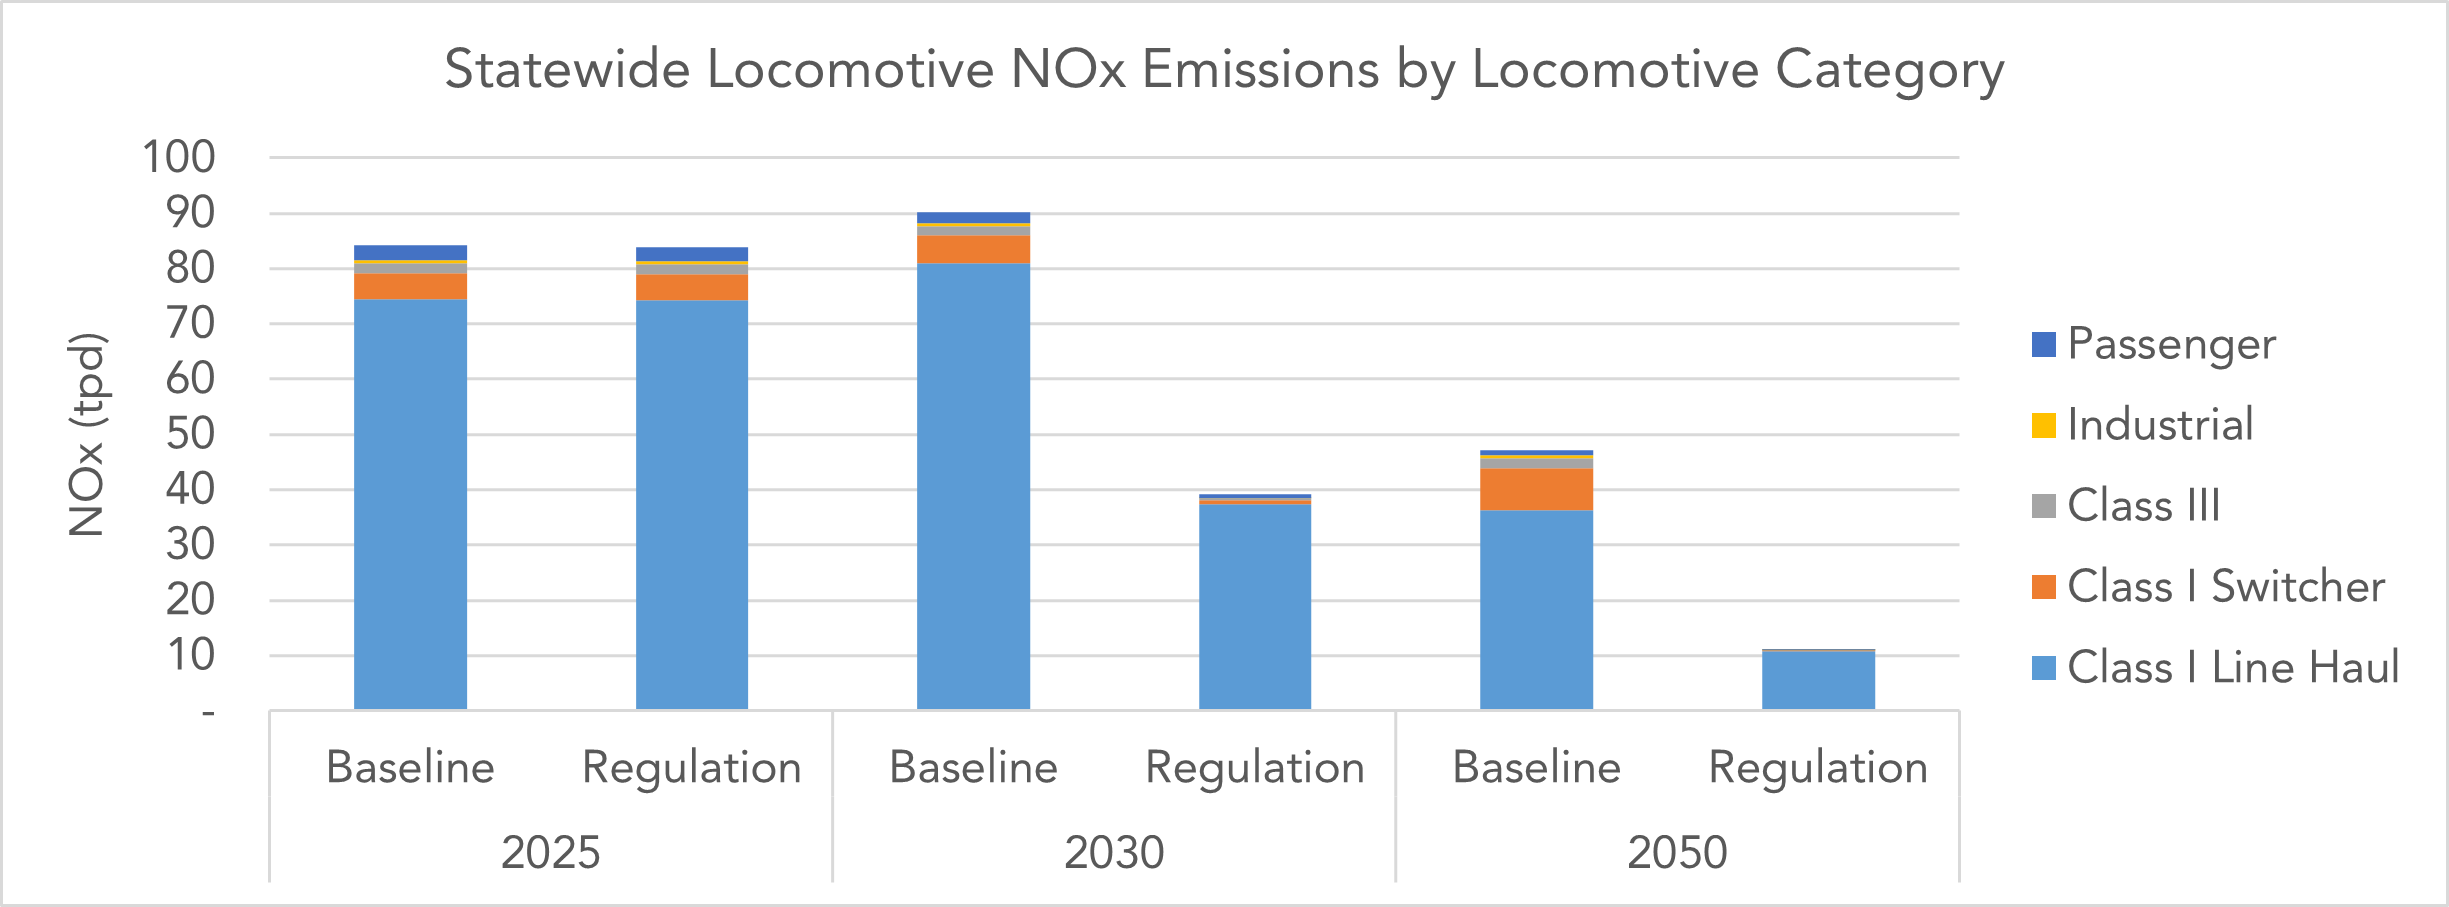 Bar chart showing the effect of the regulation of the NOx emission of the state's locomotives. The chart shows a reduction of 86% of the NOx emissions by 2050 under the proposed regulation.